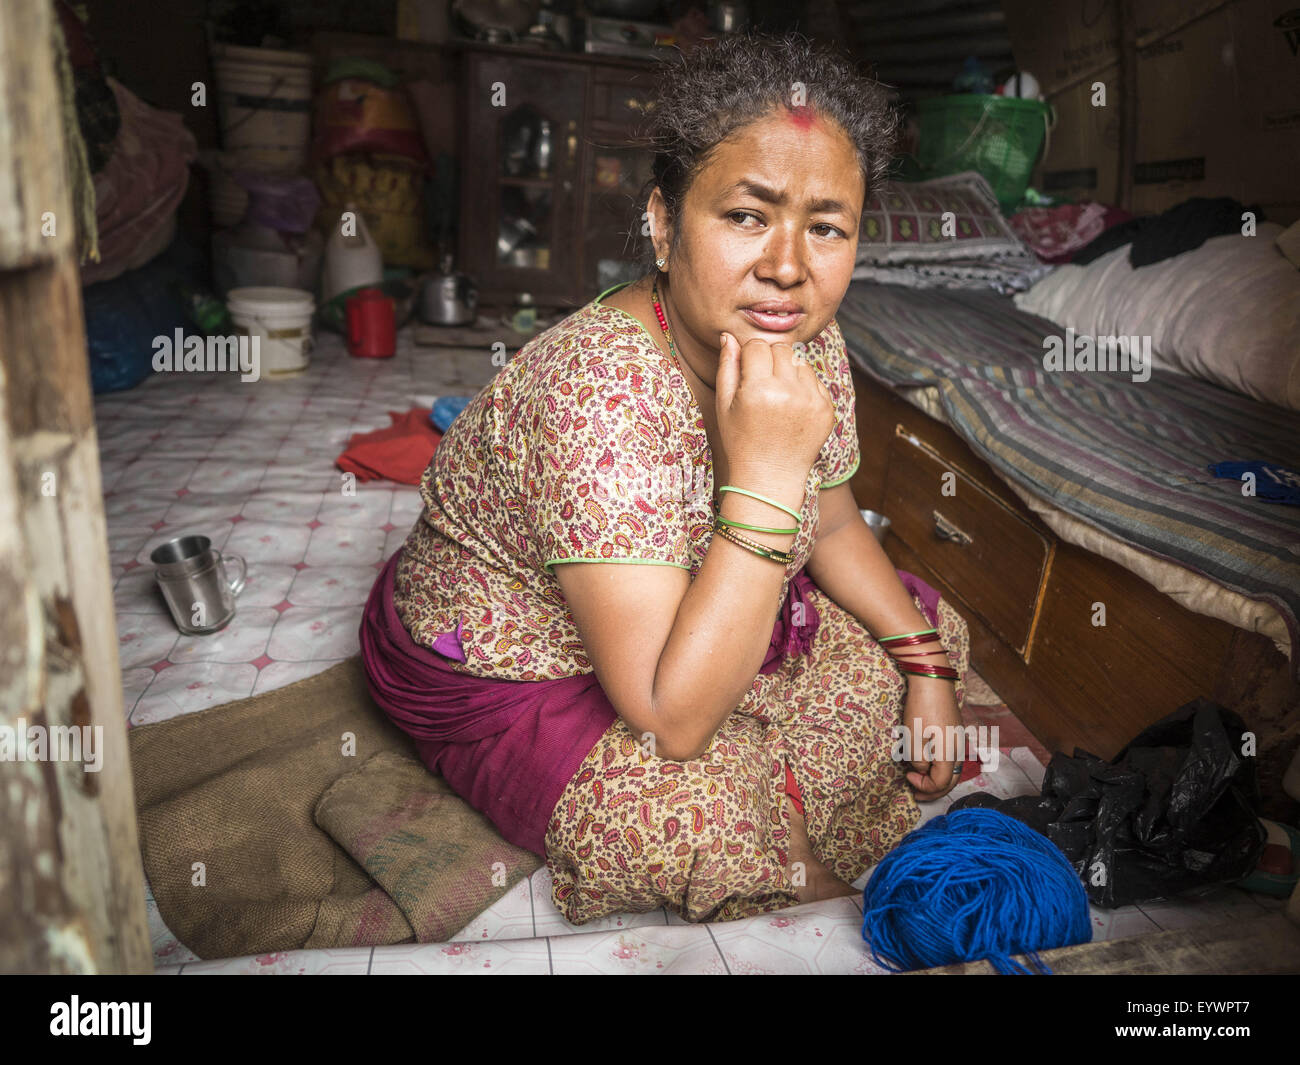 Bhaktapur, Central Region, Nepal. 2nd Aug, 2015. A woman sits in her temporary shelter in Bhaktapur. The Nepal Earthquake on April 25, 2015, (also known as the Gorkha earthquake) killed more than 9,000 people and injured more than 23,000. It had a magnitude of 7.8.  It was the worst natural disaster to strike Nepal since the 1934 Nepal''“Bihar earthquake. The earthquake triggered an avalanche on Mount Everest, killing at least 19. © ZUMA Press, Inc./Alamy Live News Stock Photo